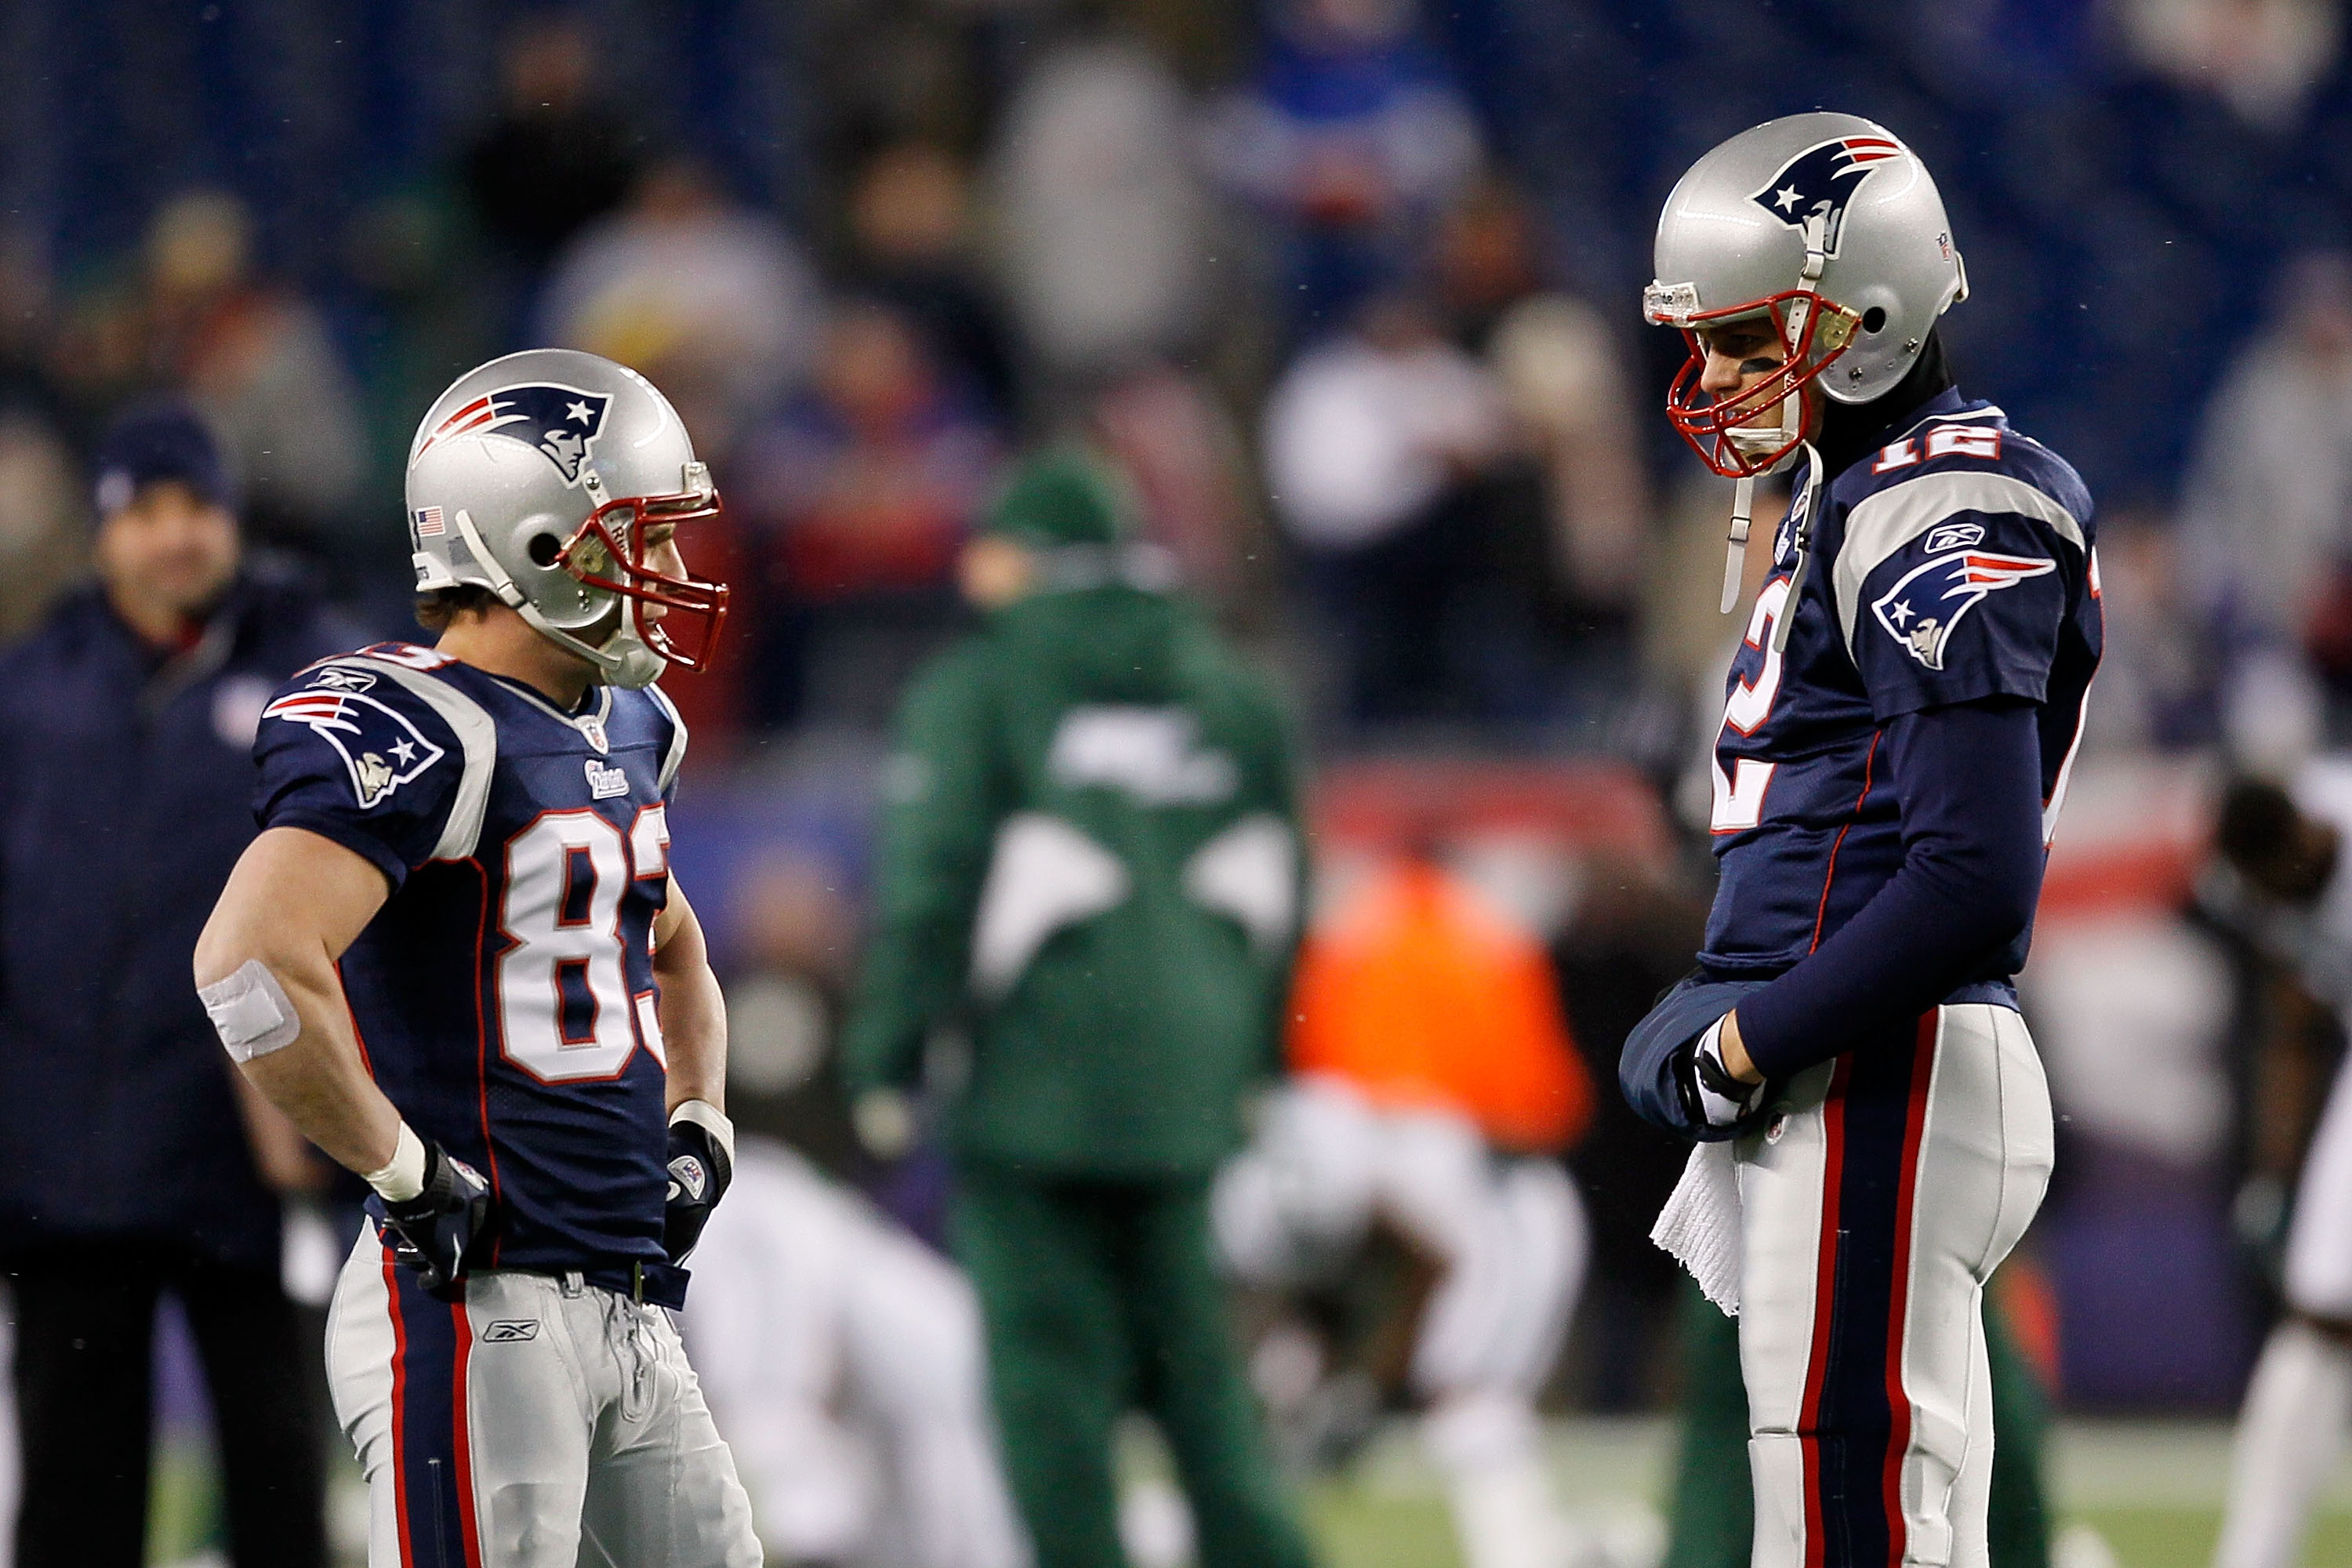 FOXBORO, MA - DECEMBER 06:  Tom Brady #12 (R) and Wes Welker #83 of the New England Patriots talk on the field during warms up against the New York Jets at Gillette Stadium on December 6, 2010 in Foxboro, Massachusetts.  (Photo by Jim Rogash/Getty Images)